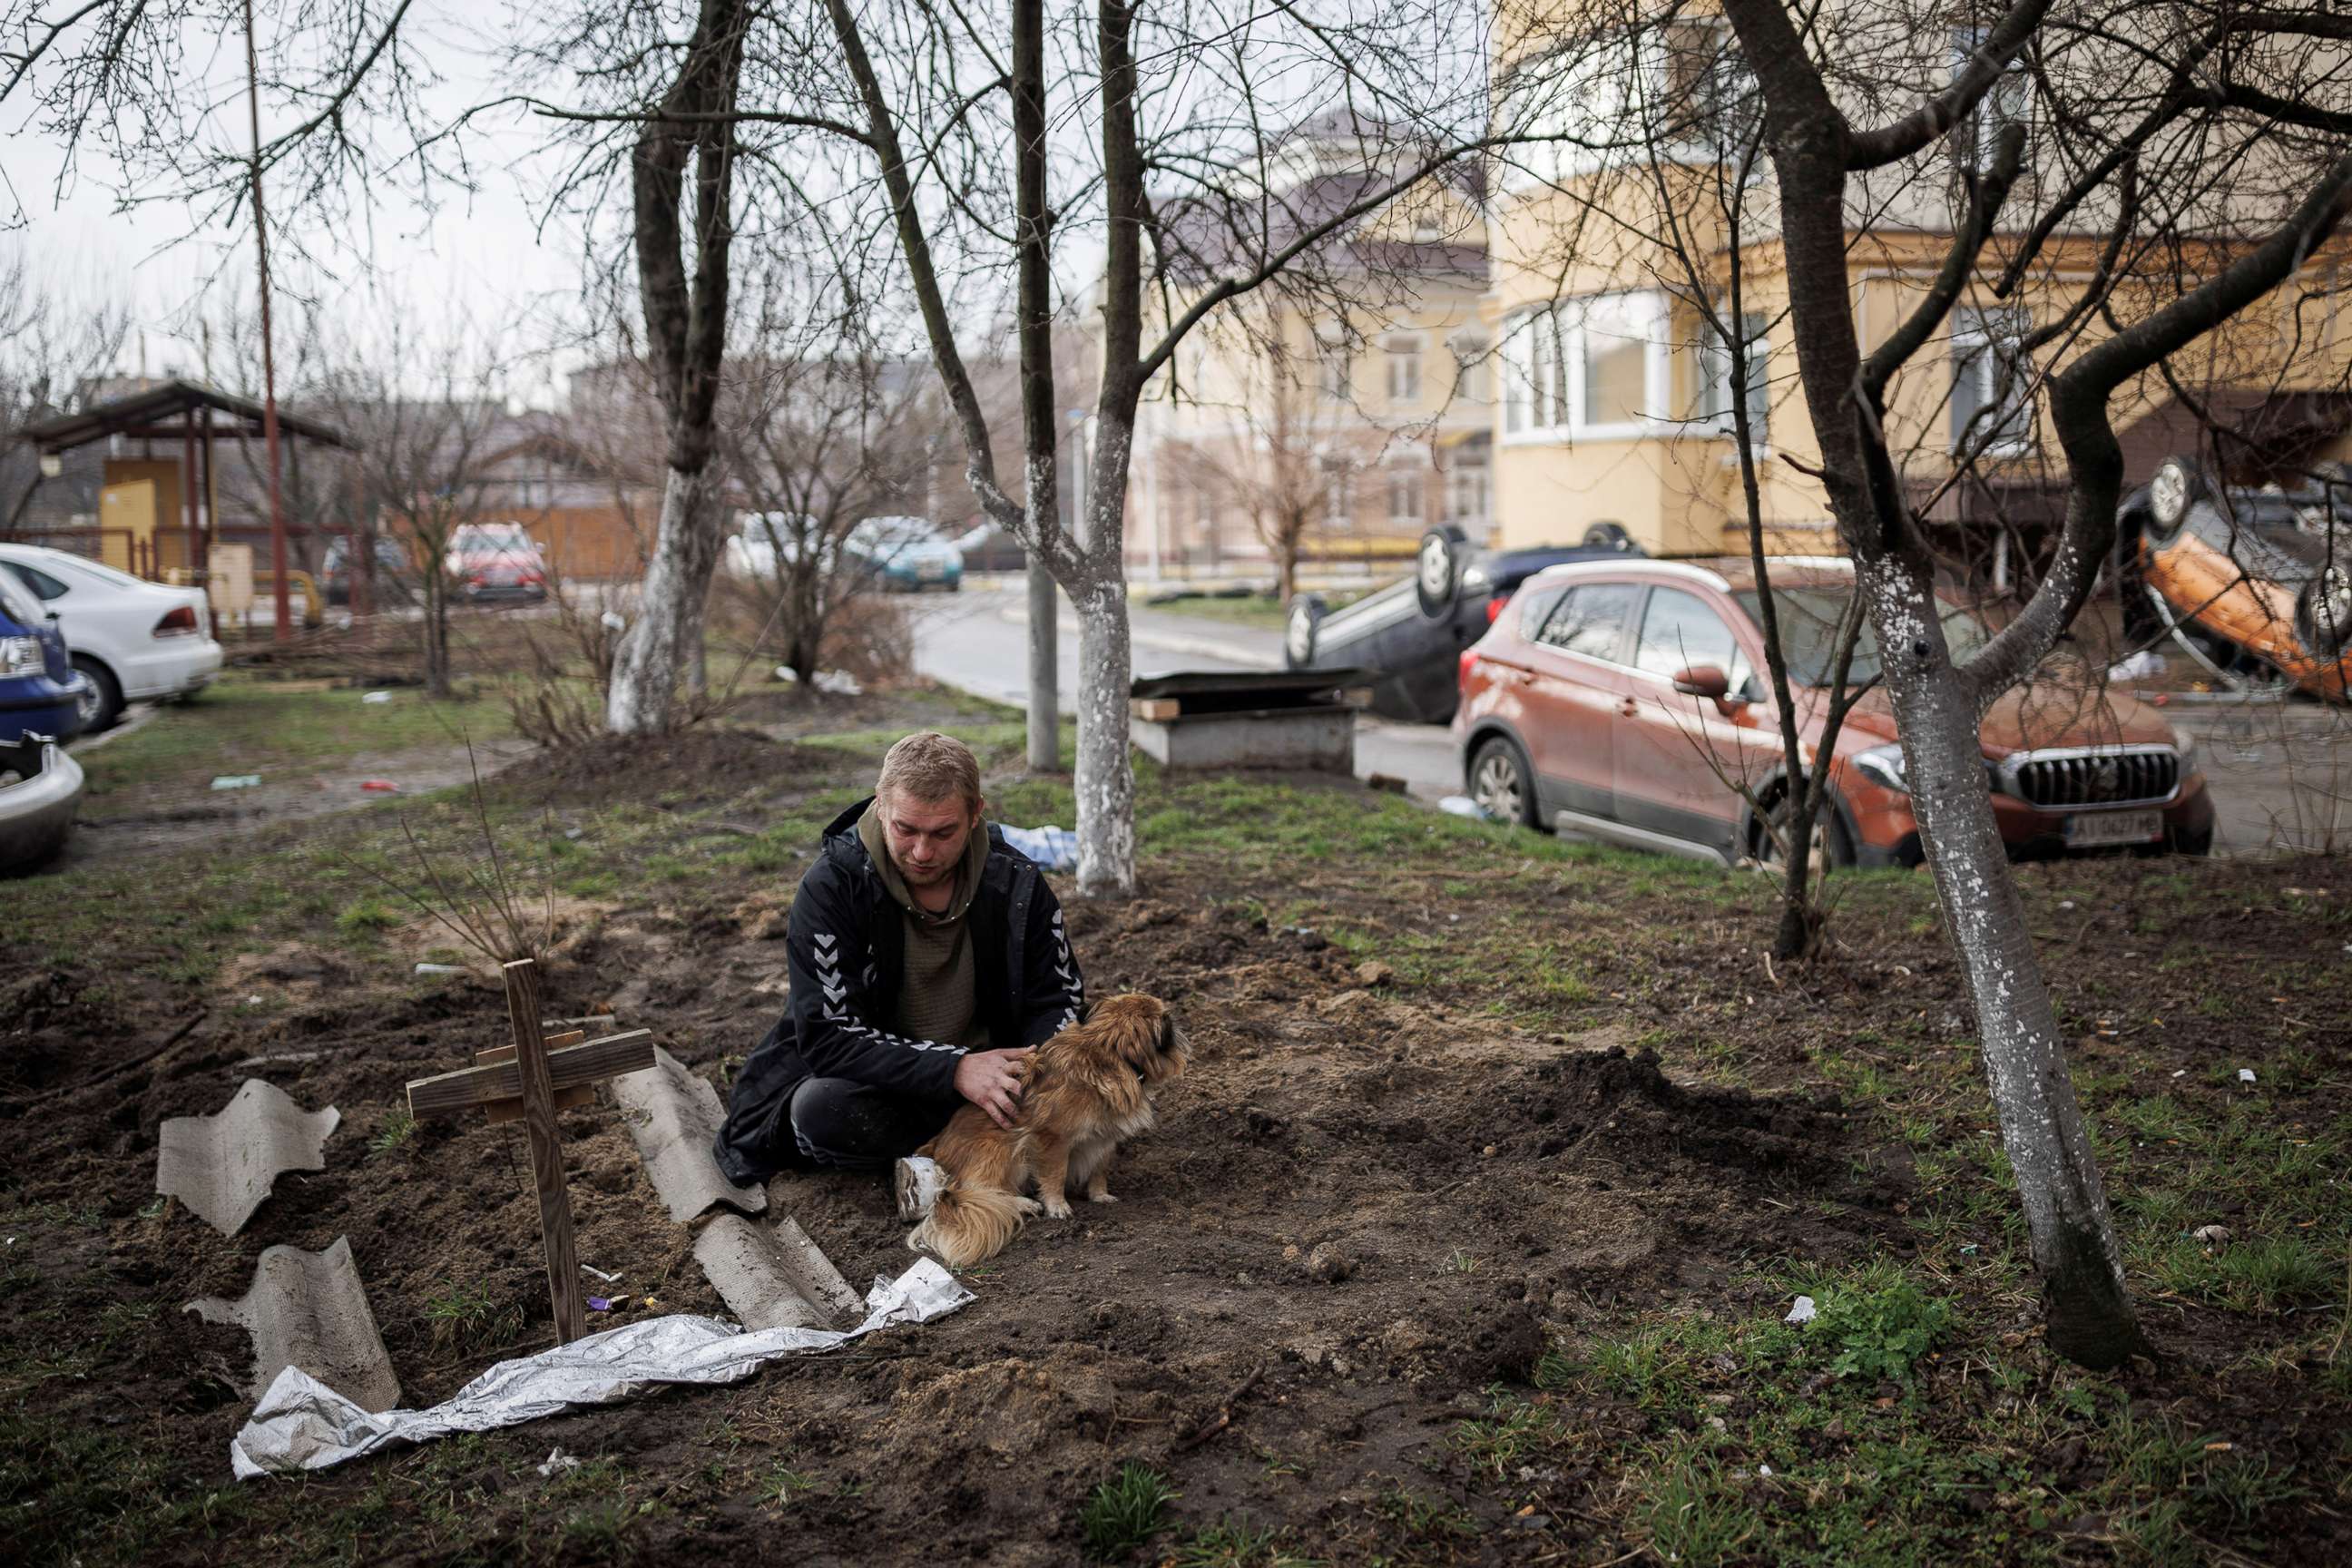 PHOTO: Serhii Lahovskyi, 26, mourns next to the grave of his friend Ihor Lytvynenko, who according to residents was killed by Russian soldiers, after they found him beside a building's basement, in Bucha, Ukraine, April 6, 2022.